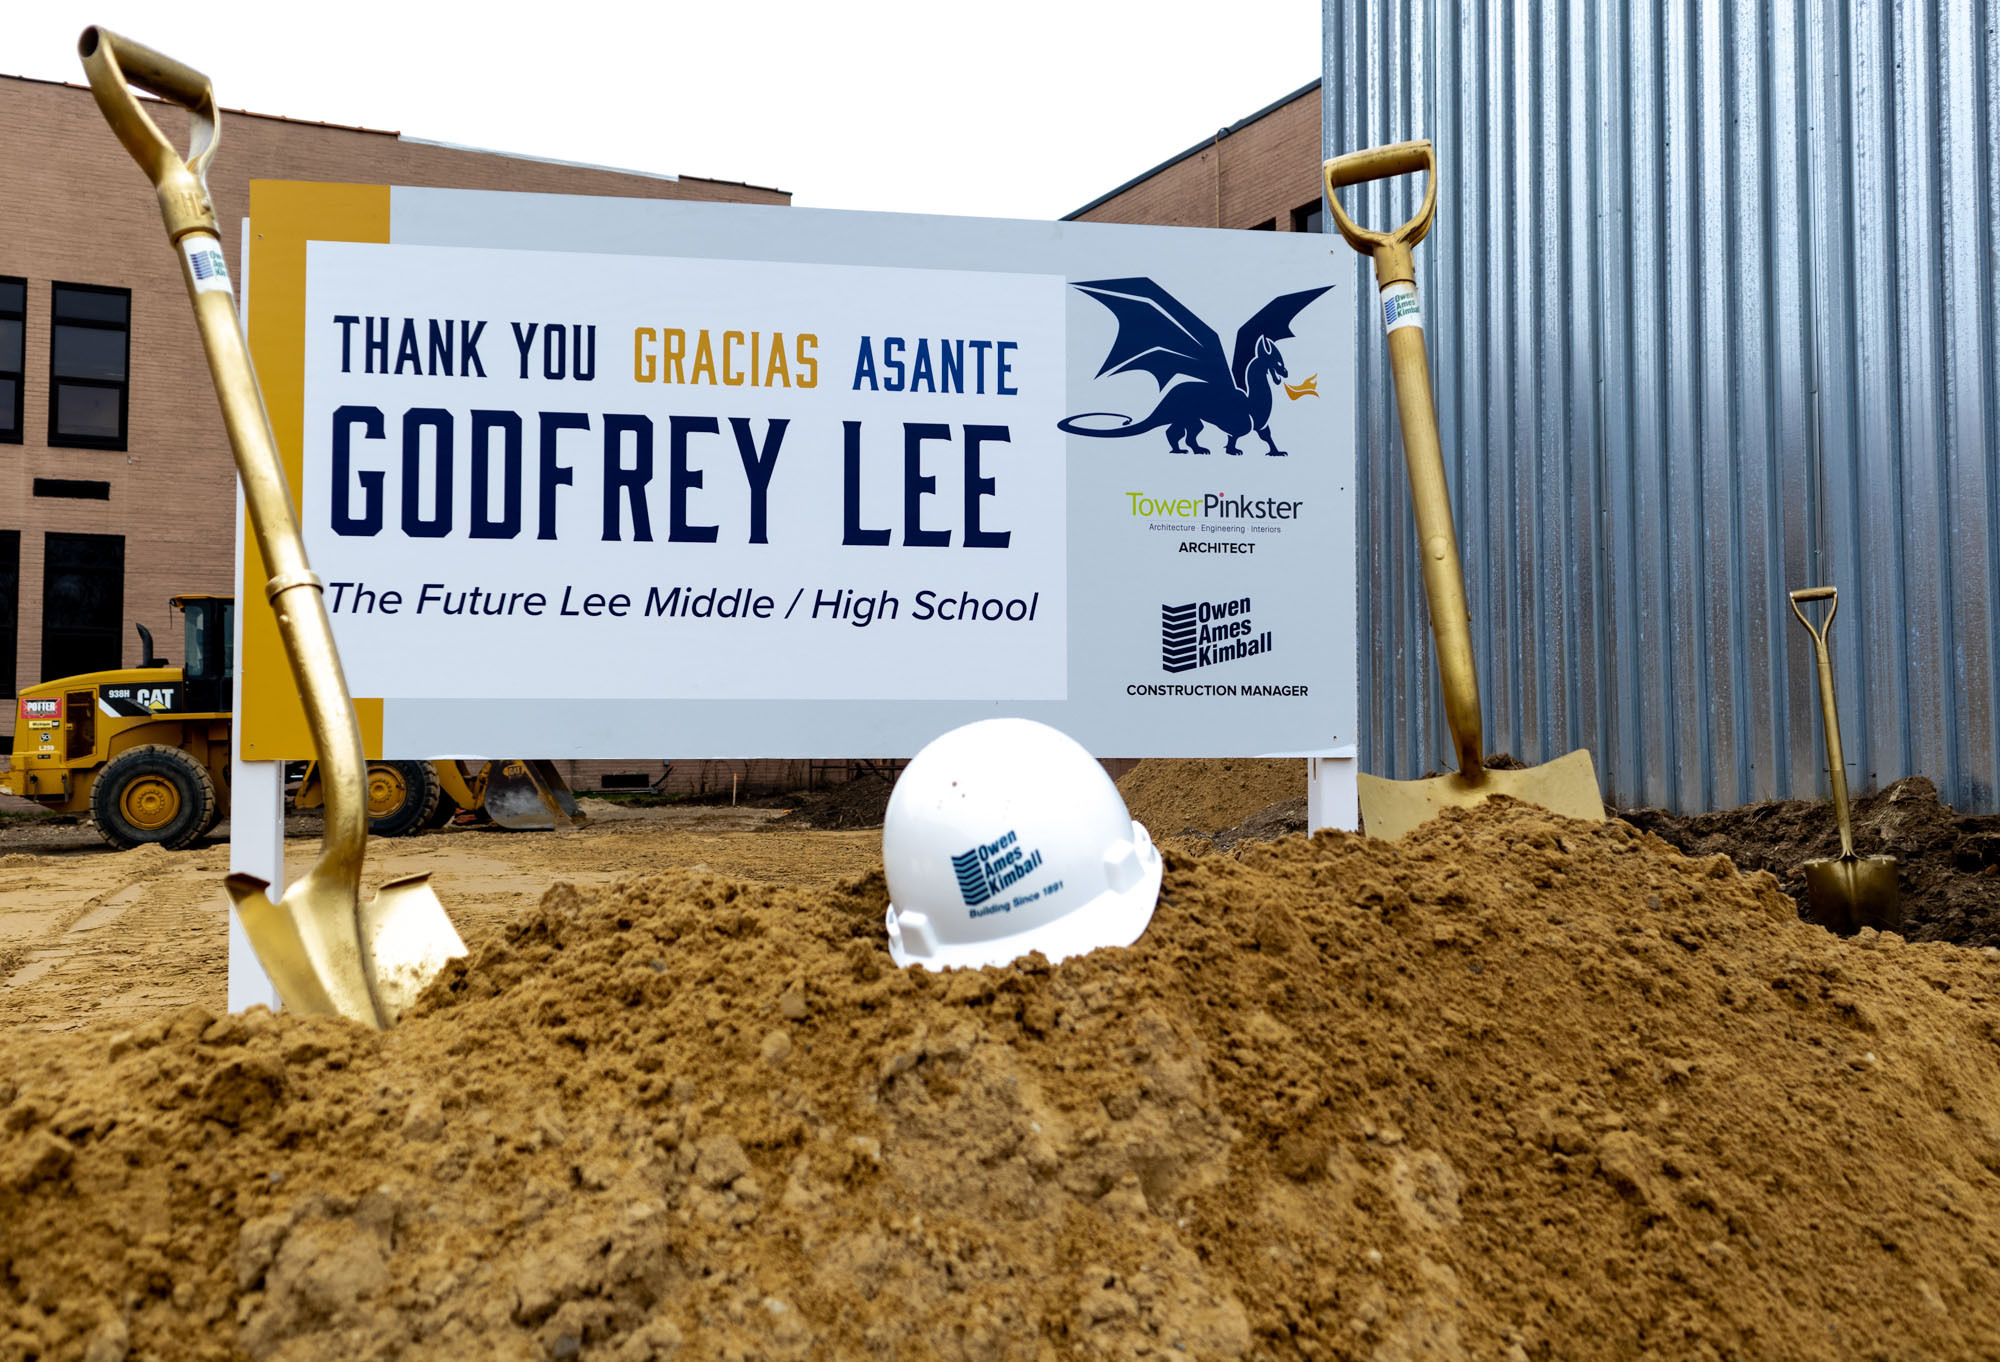 Groundbreaking Sign - Thank you Godfrey-Lee, The Future Lee Middle/High School